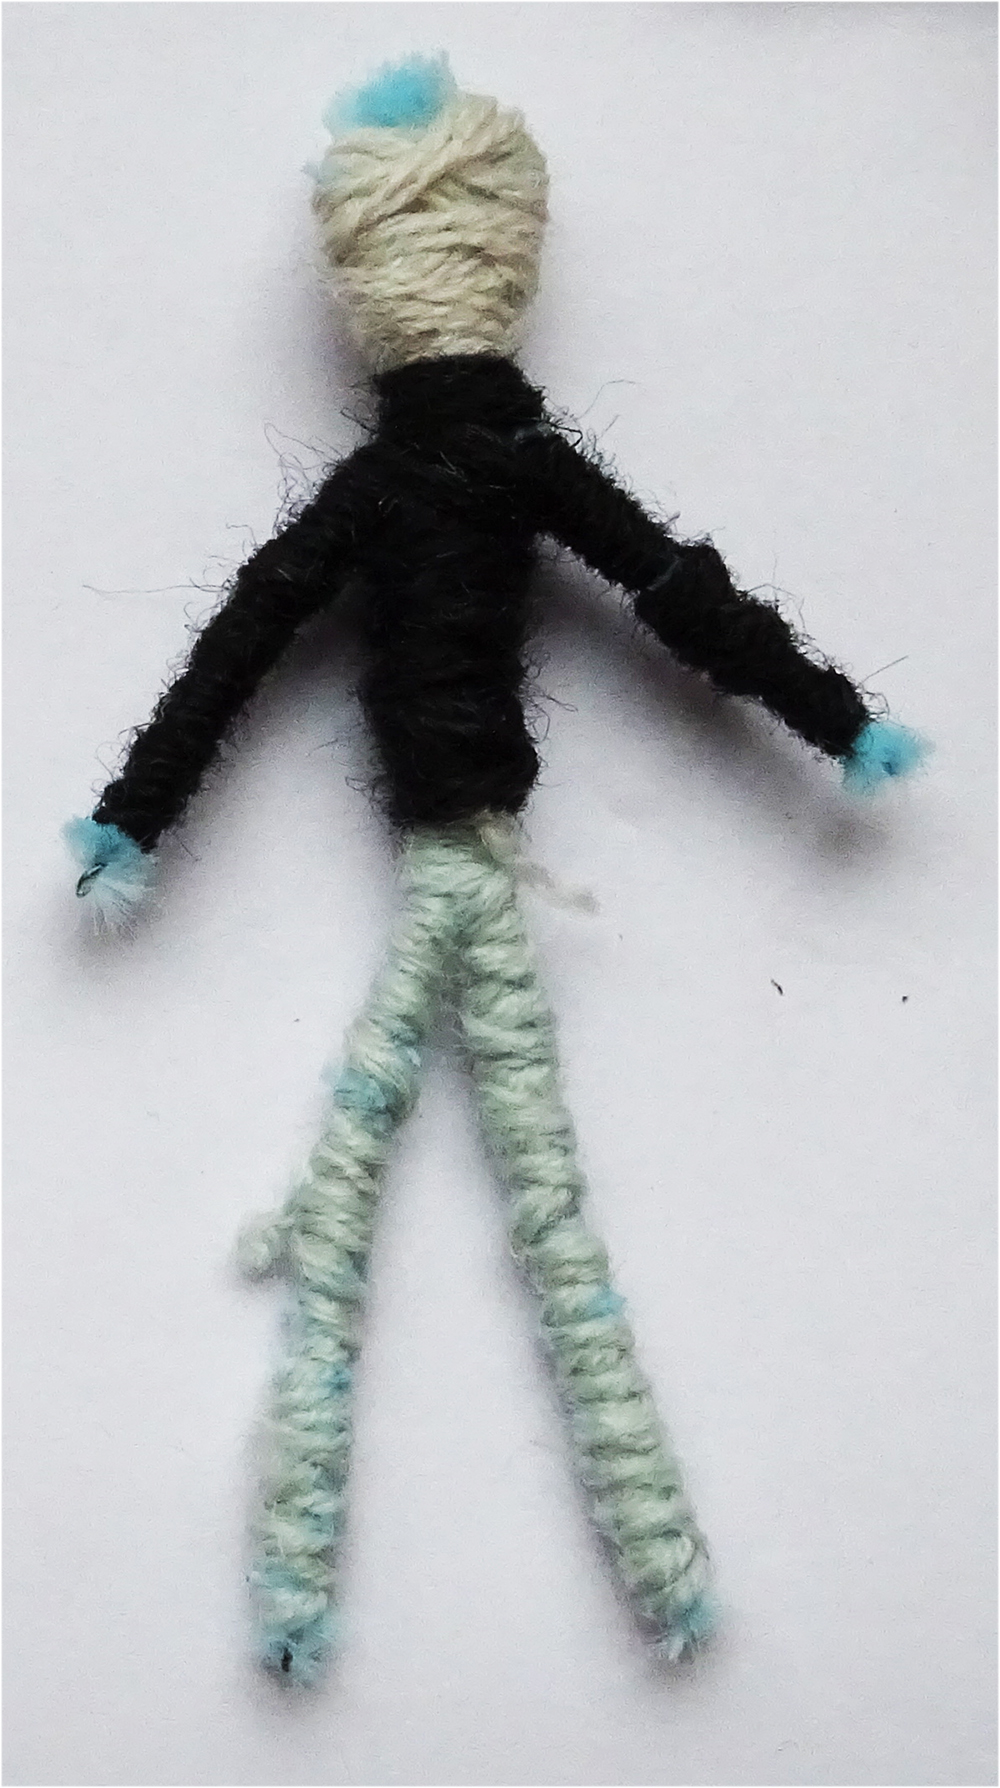 Finished worry doll